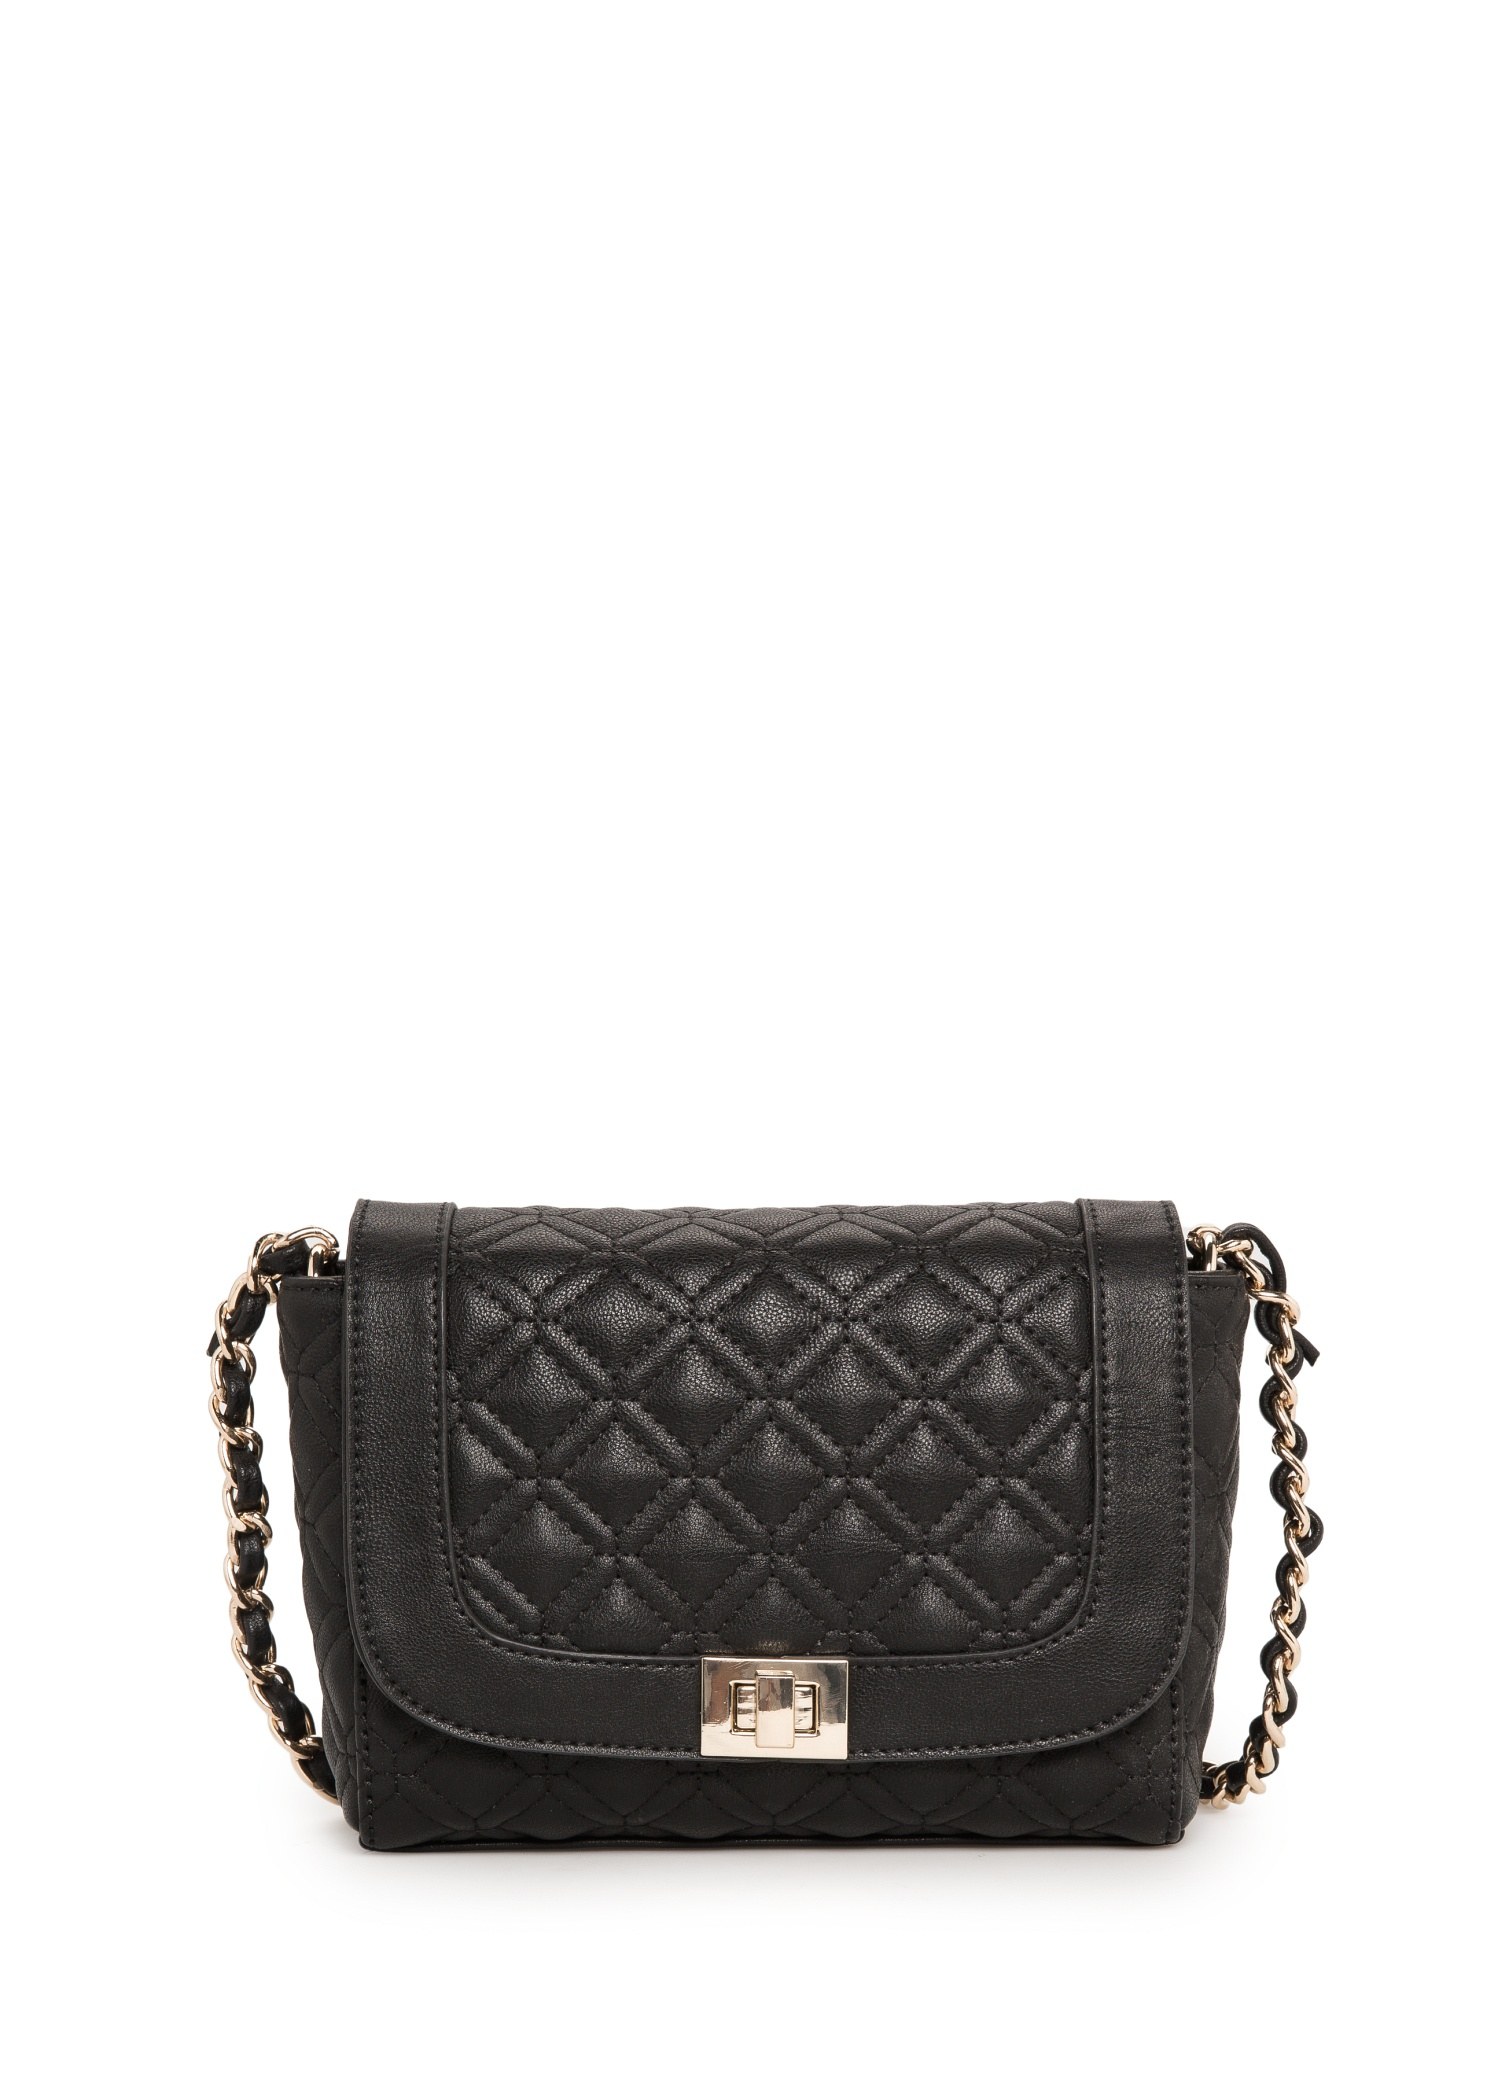 Lyst - Mango Quilted Cross-Body Bag in Black